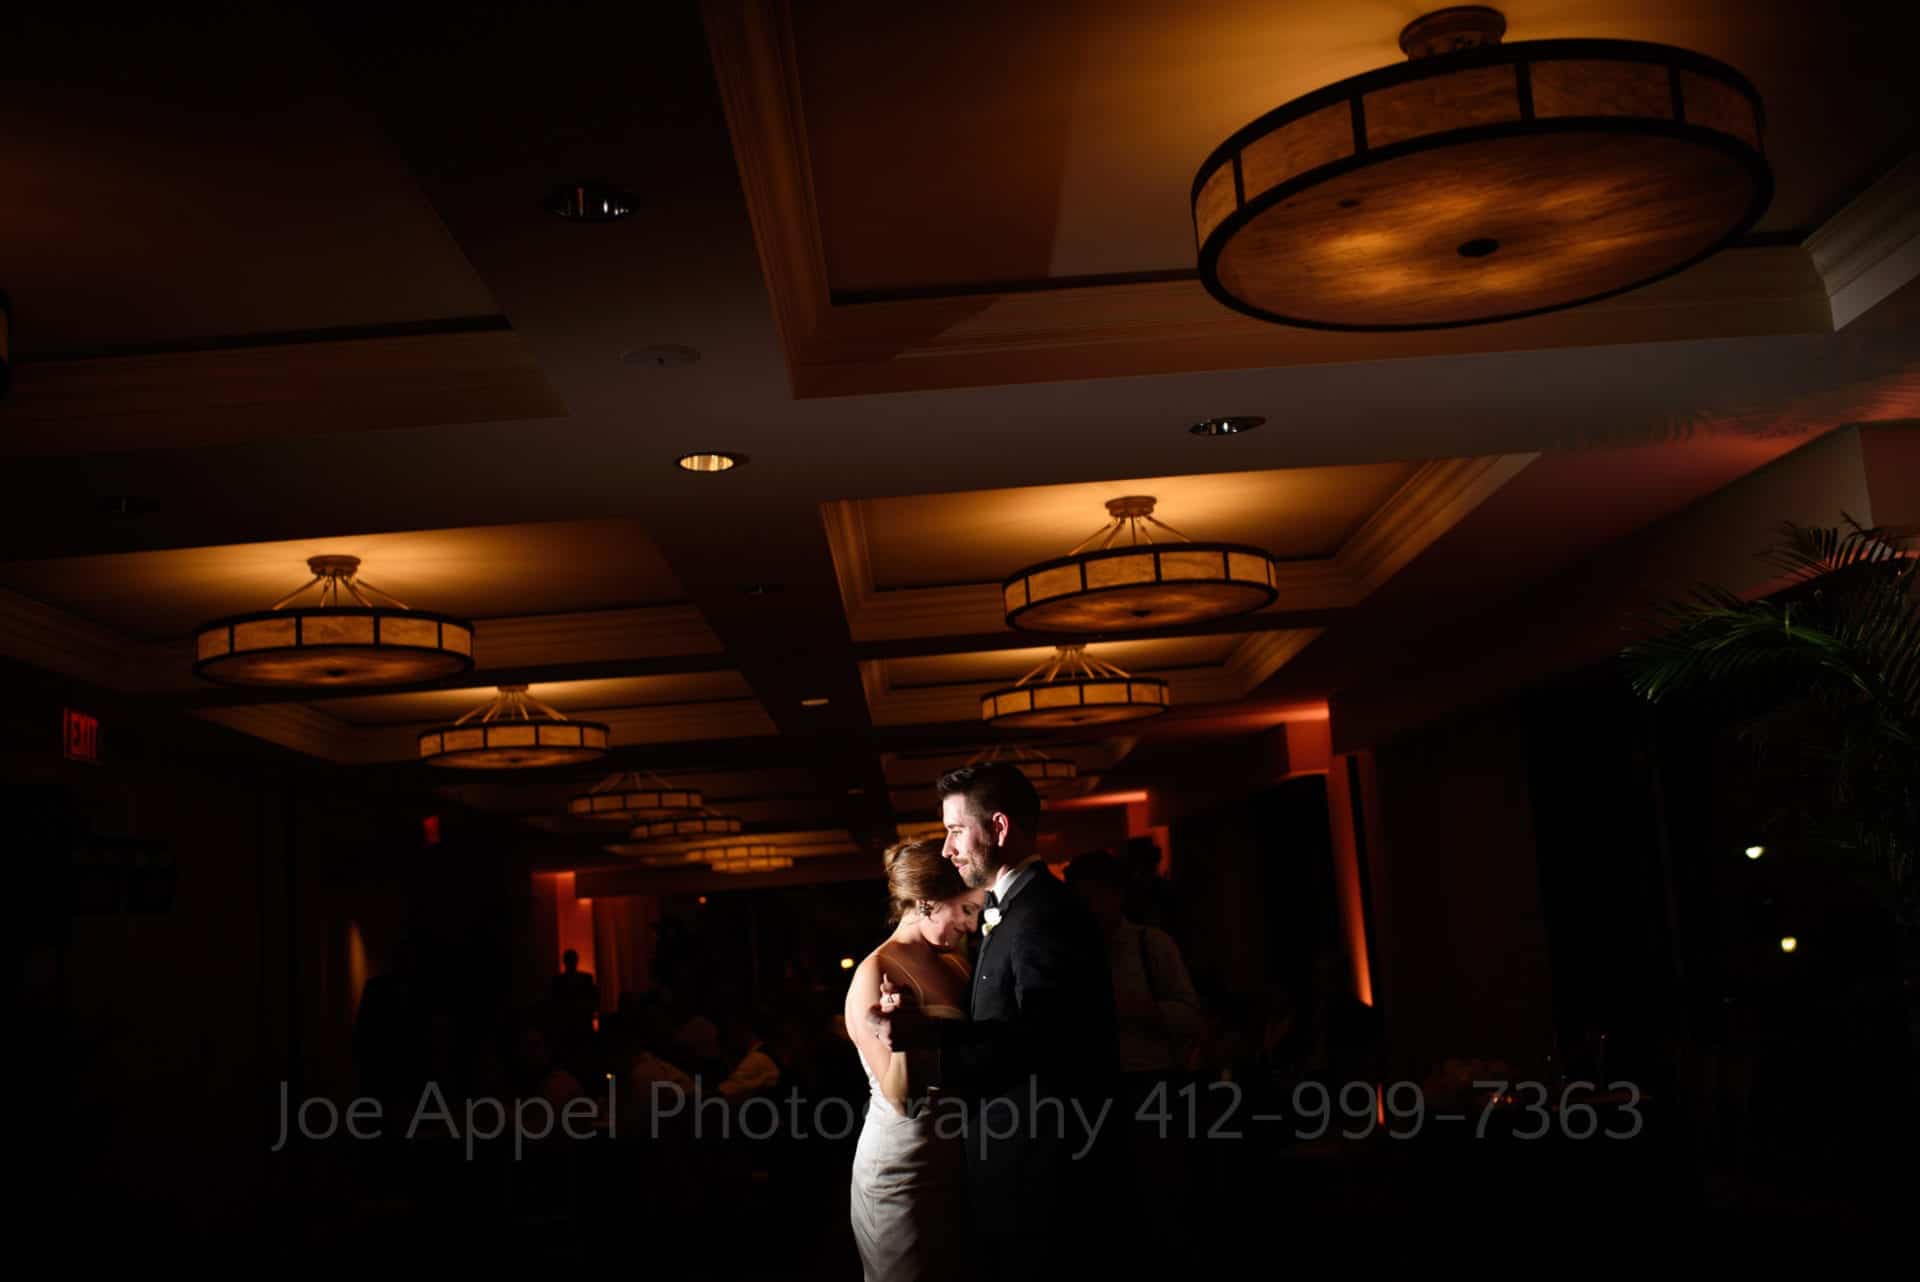 an illuminated bride and groom dance in a dark room